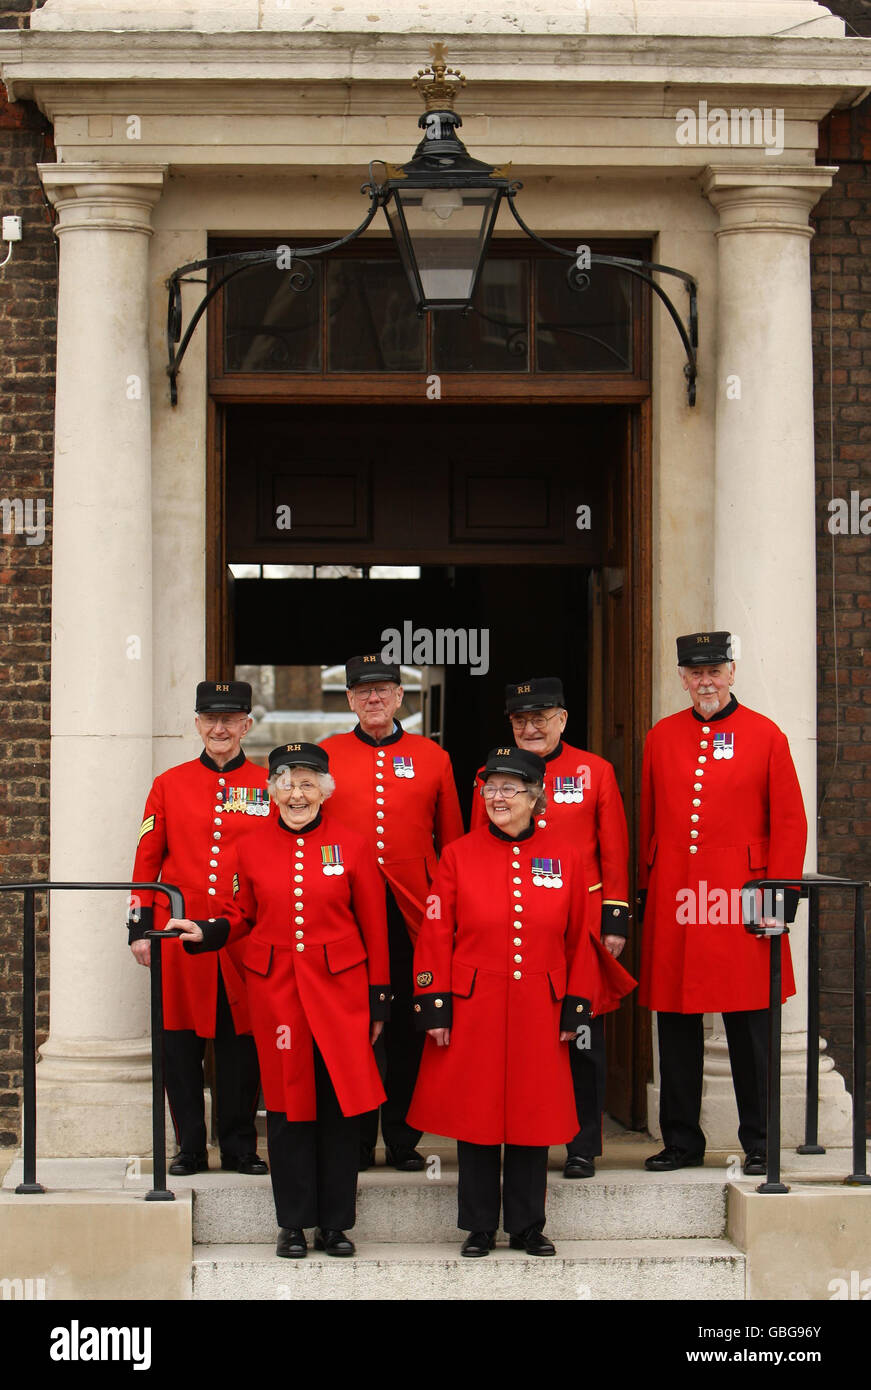 Winifred Phillips (front right) and Dorothy Hughes (front left) are welcomed by Chelsea Pensioners (back left to right) Lewis Prangle, Geoff Crowther, Ralph Dickinson and Alan Swain as the first women Chelsea pensioners at the Royal Hospital Chelsea in London. Stock Photo